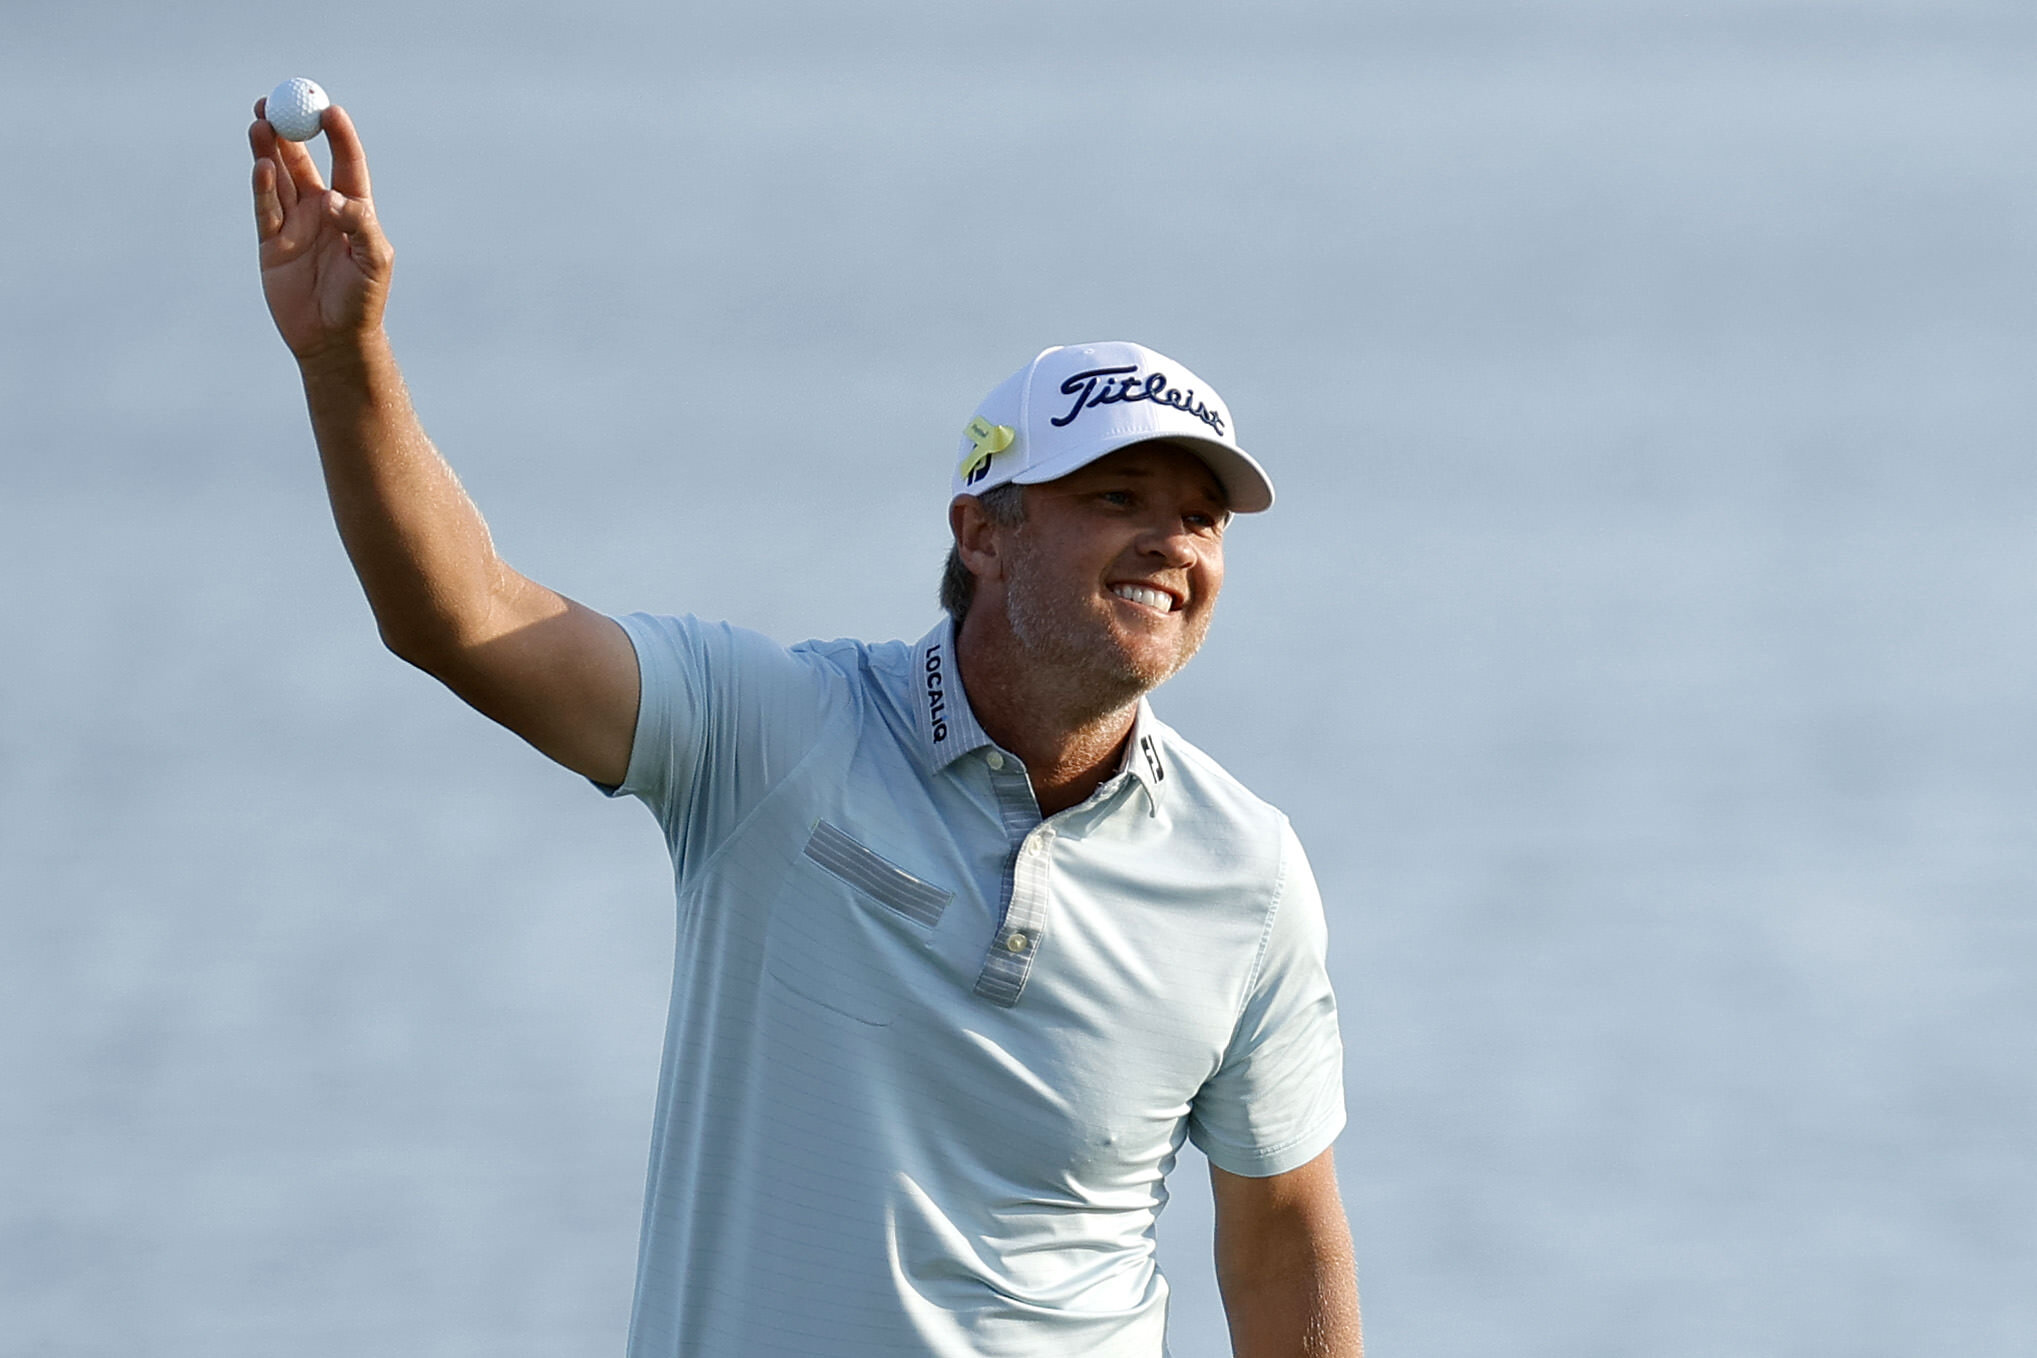  PALM BEACH GARDENS, FLORIDA - MARCH 21: Matt Jones of Australia celebrates on the 18th green after winning during the final round of The Honda Classic at PGA National Champion course on March 21, 2021 in Palm Beach Gardens, Florida. (Photo by Jared 